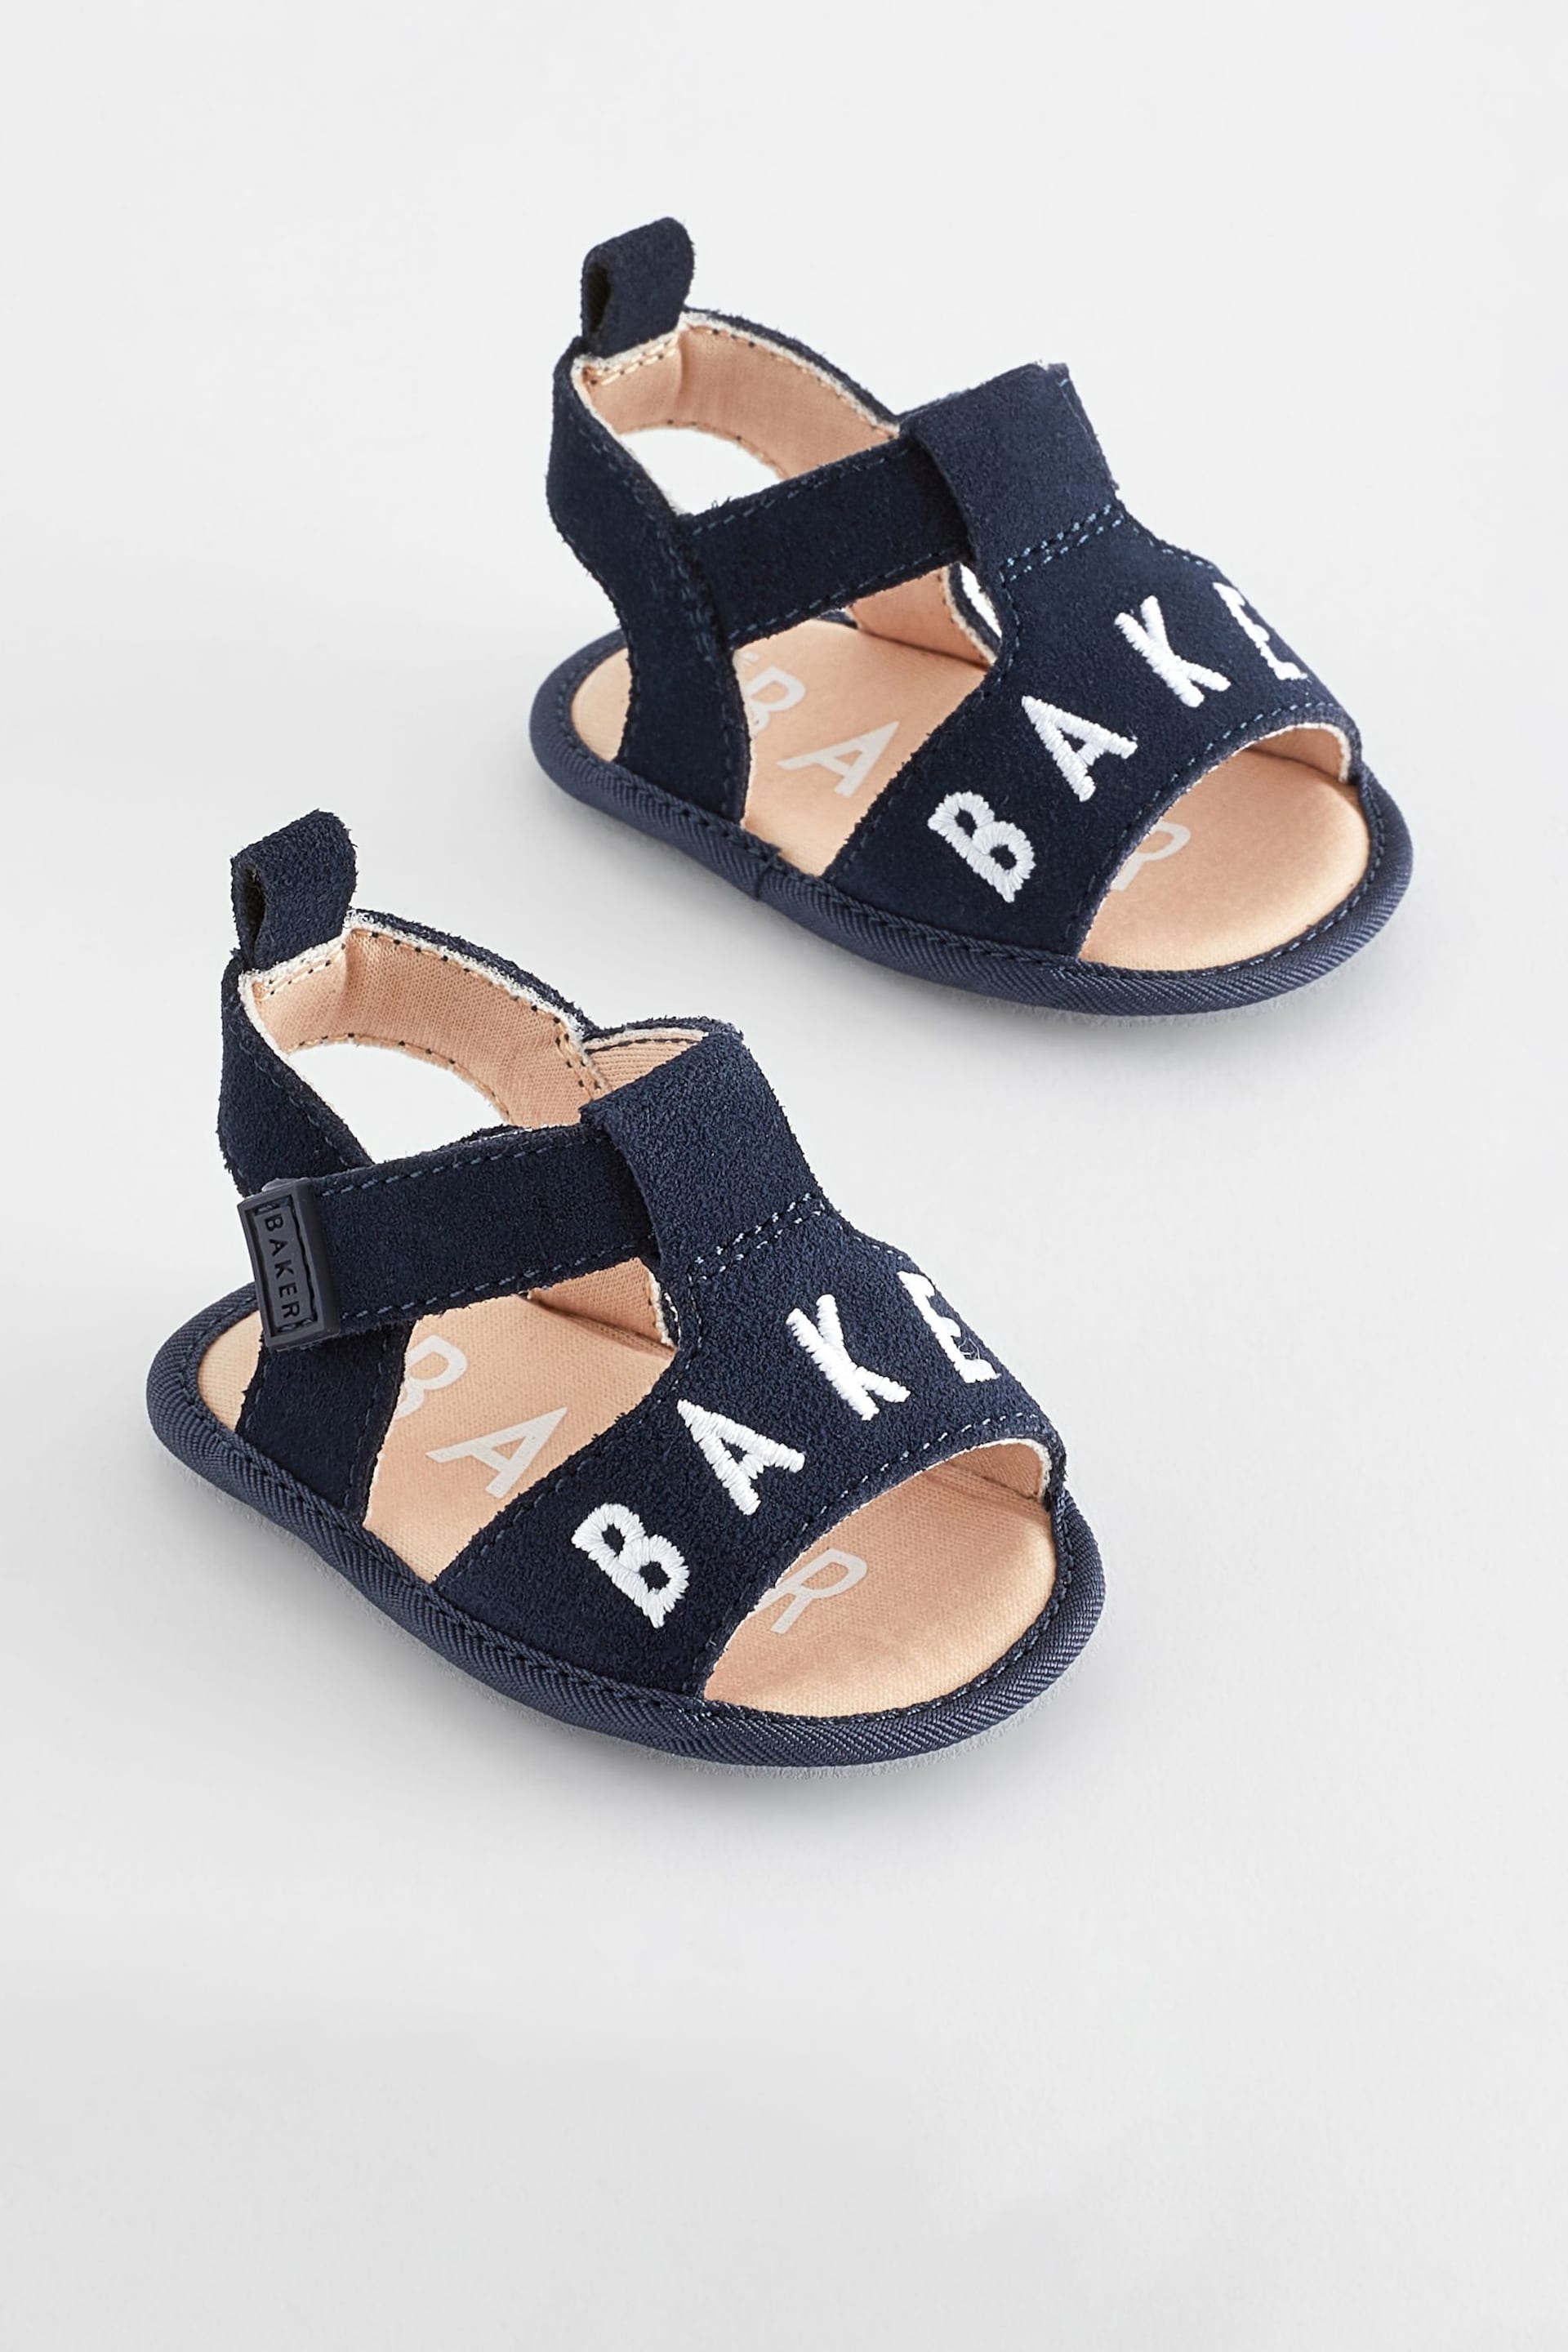 Baker by Ted Baker Baby Boys Navy Padders Sandals - Image 1 of 6